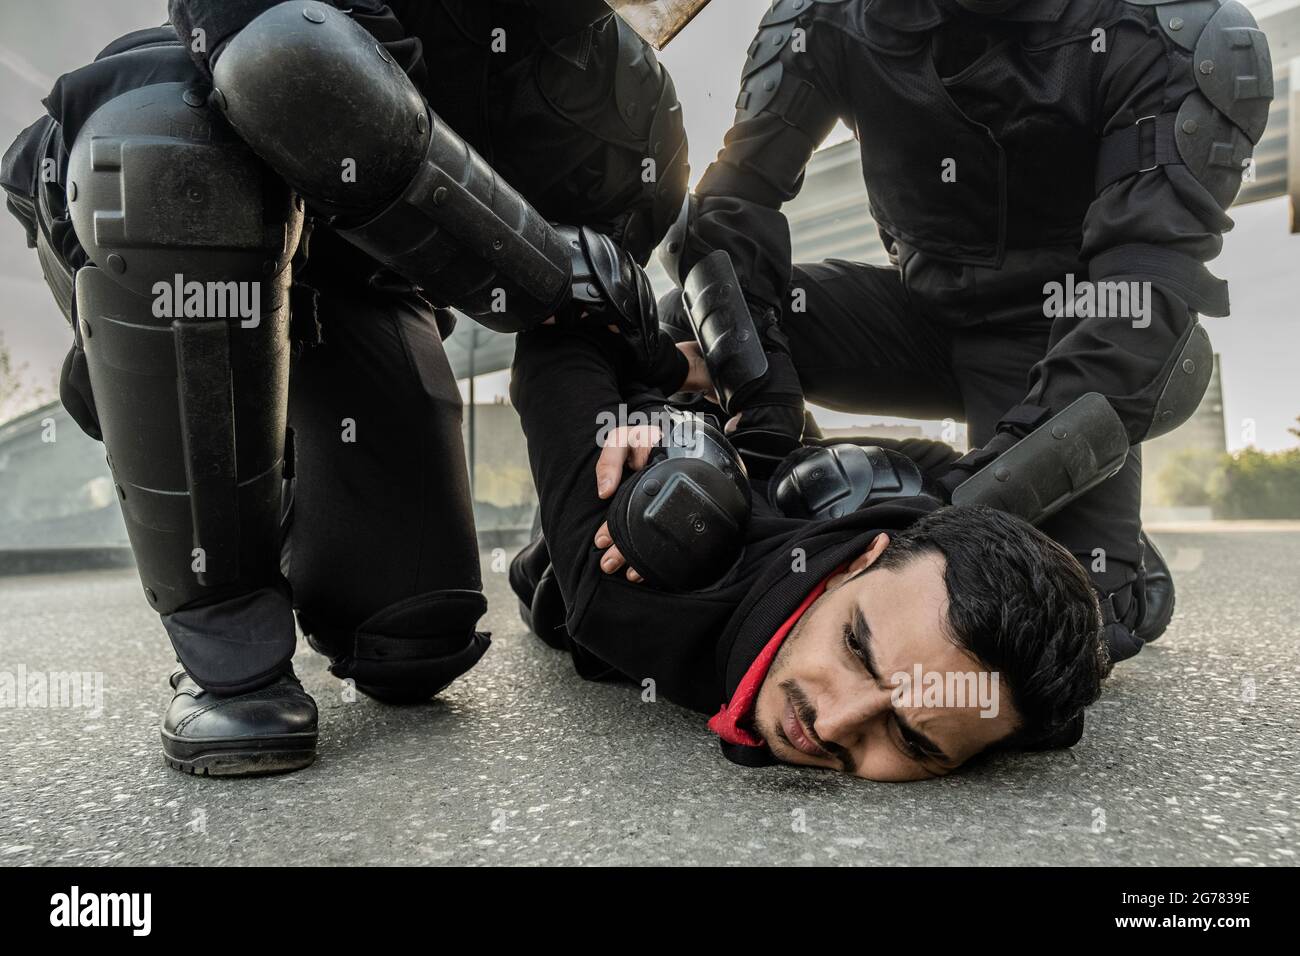 Riot force in protective wear pressing middle eastern man to ground while rresting him during rally Stock Photo